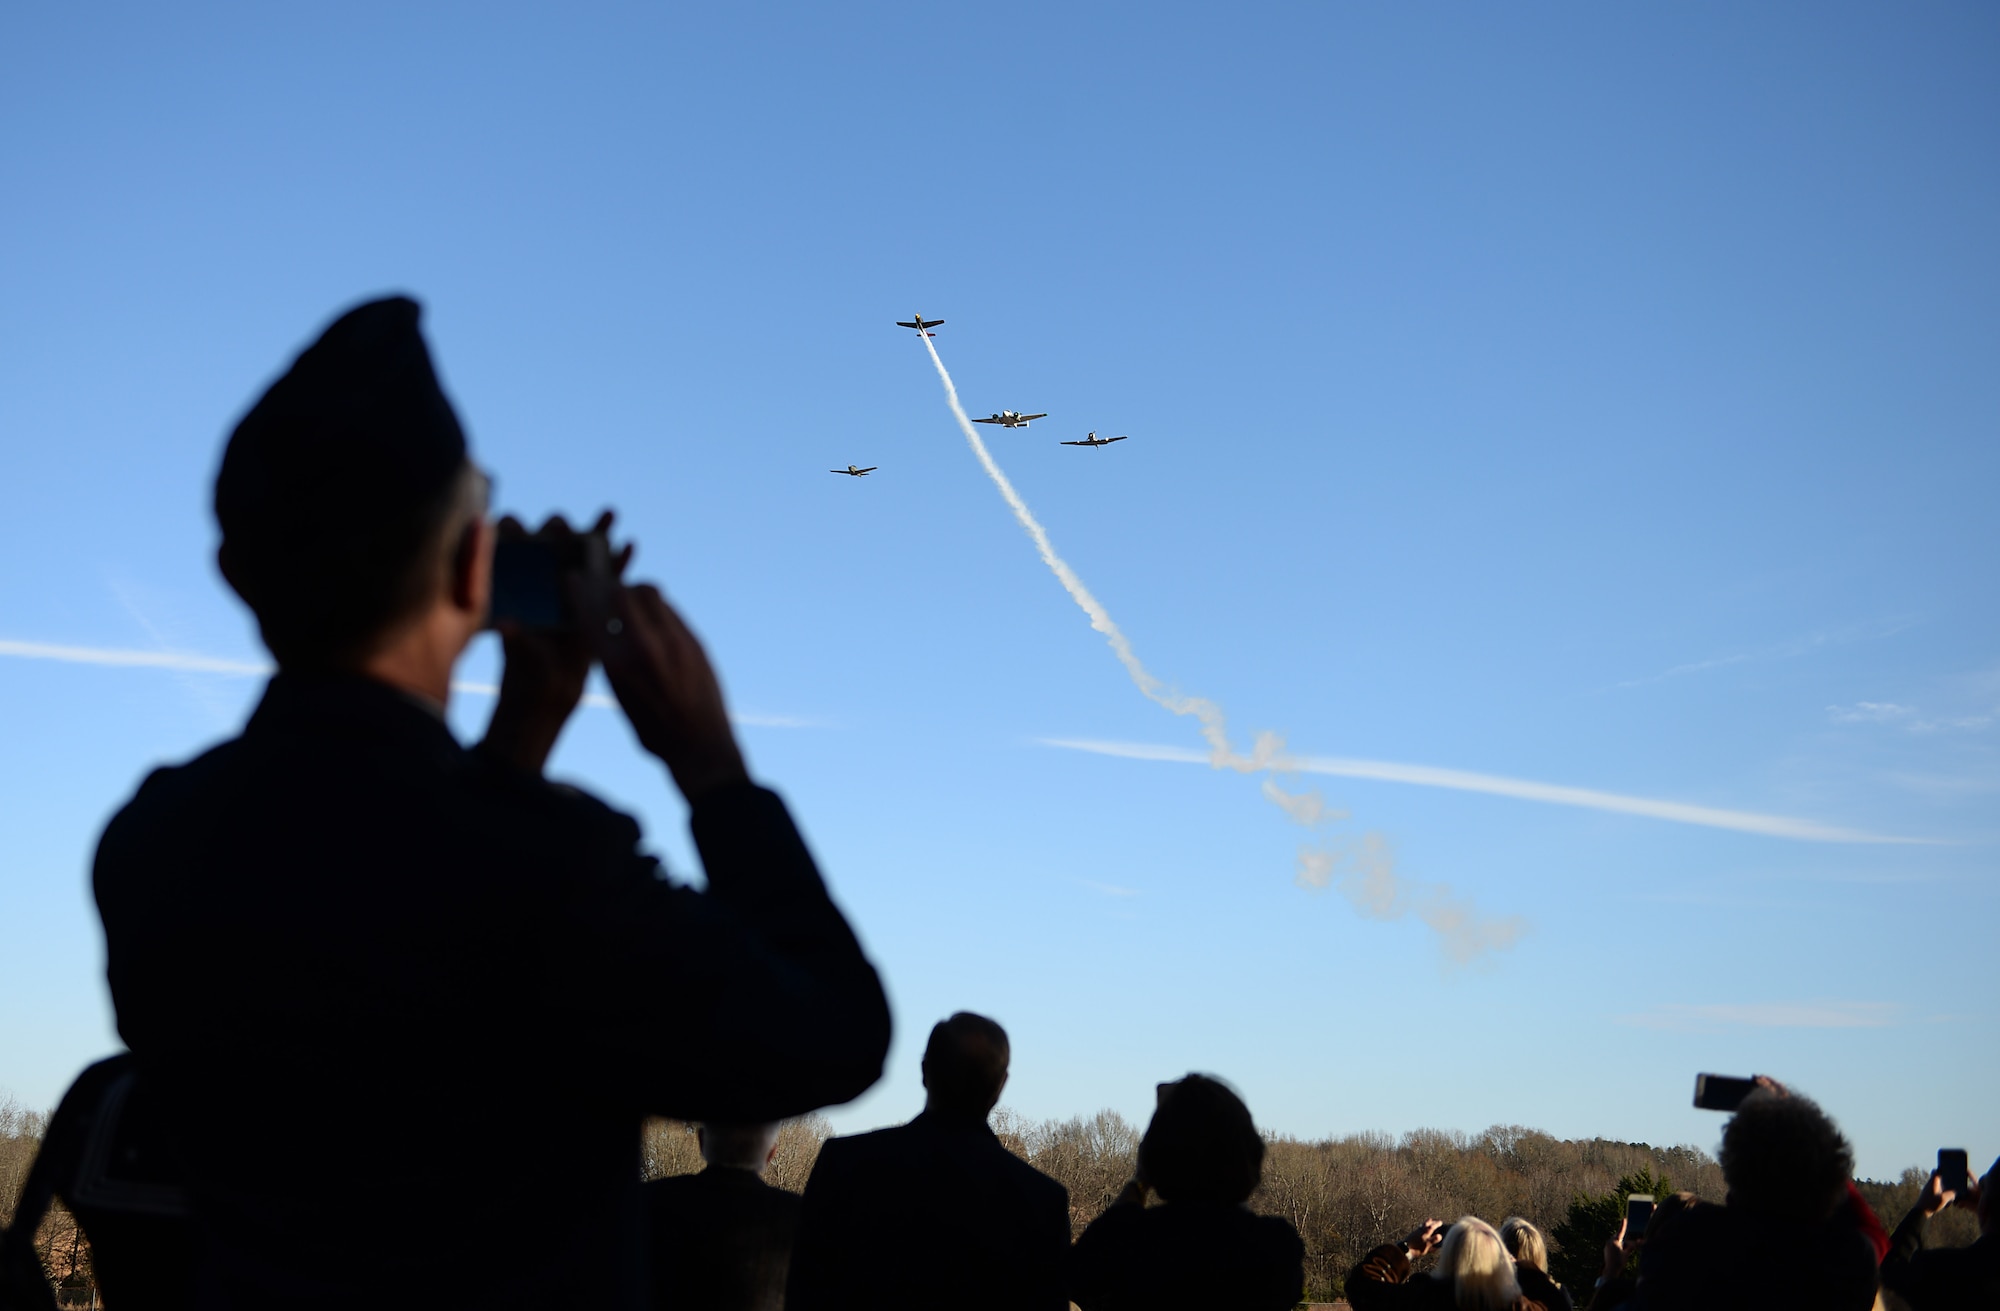 A family member of former Army Air Corps Capt. Charles T. Hull records a four-ship formation during a funeral and burial service with full military honors Dec. 4, 2019, at Duck Hill Cemetery in Winona, Miss. Hull, a decorated World War II bomber pilot who survived 25 missions in the European Theater, continued his love of travel and flying after his military career with his personal aircraft and traveled to all 50 states, 74 countries and even crossing the Arctic Circle four times. (U.S. Air Force photo by Airman Hannah 1st Class Bean)